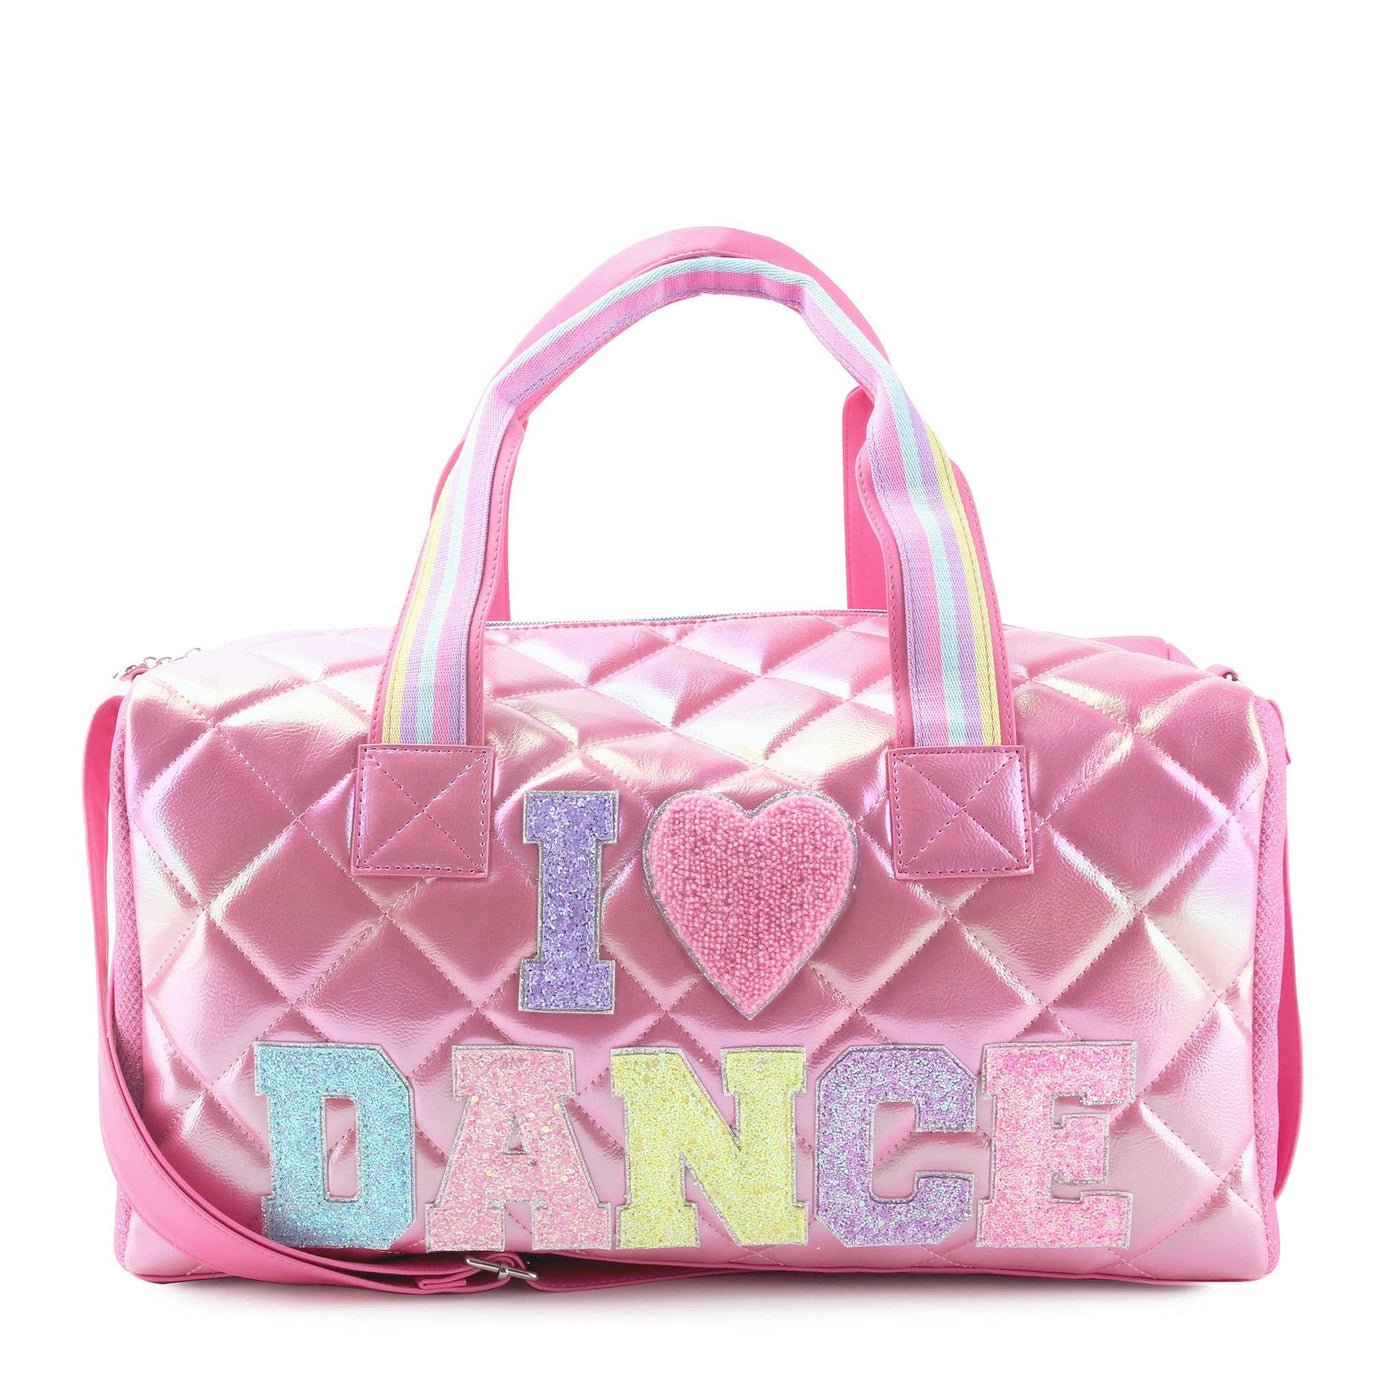 Miss Gwen's OMG Accessories - I 💗 Dance Quilted Metallic Large Duffle Bag